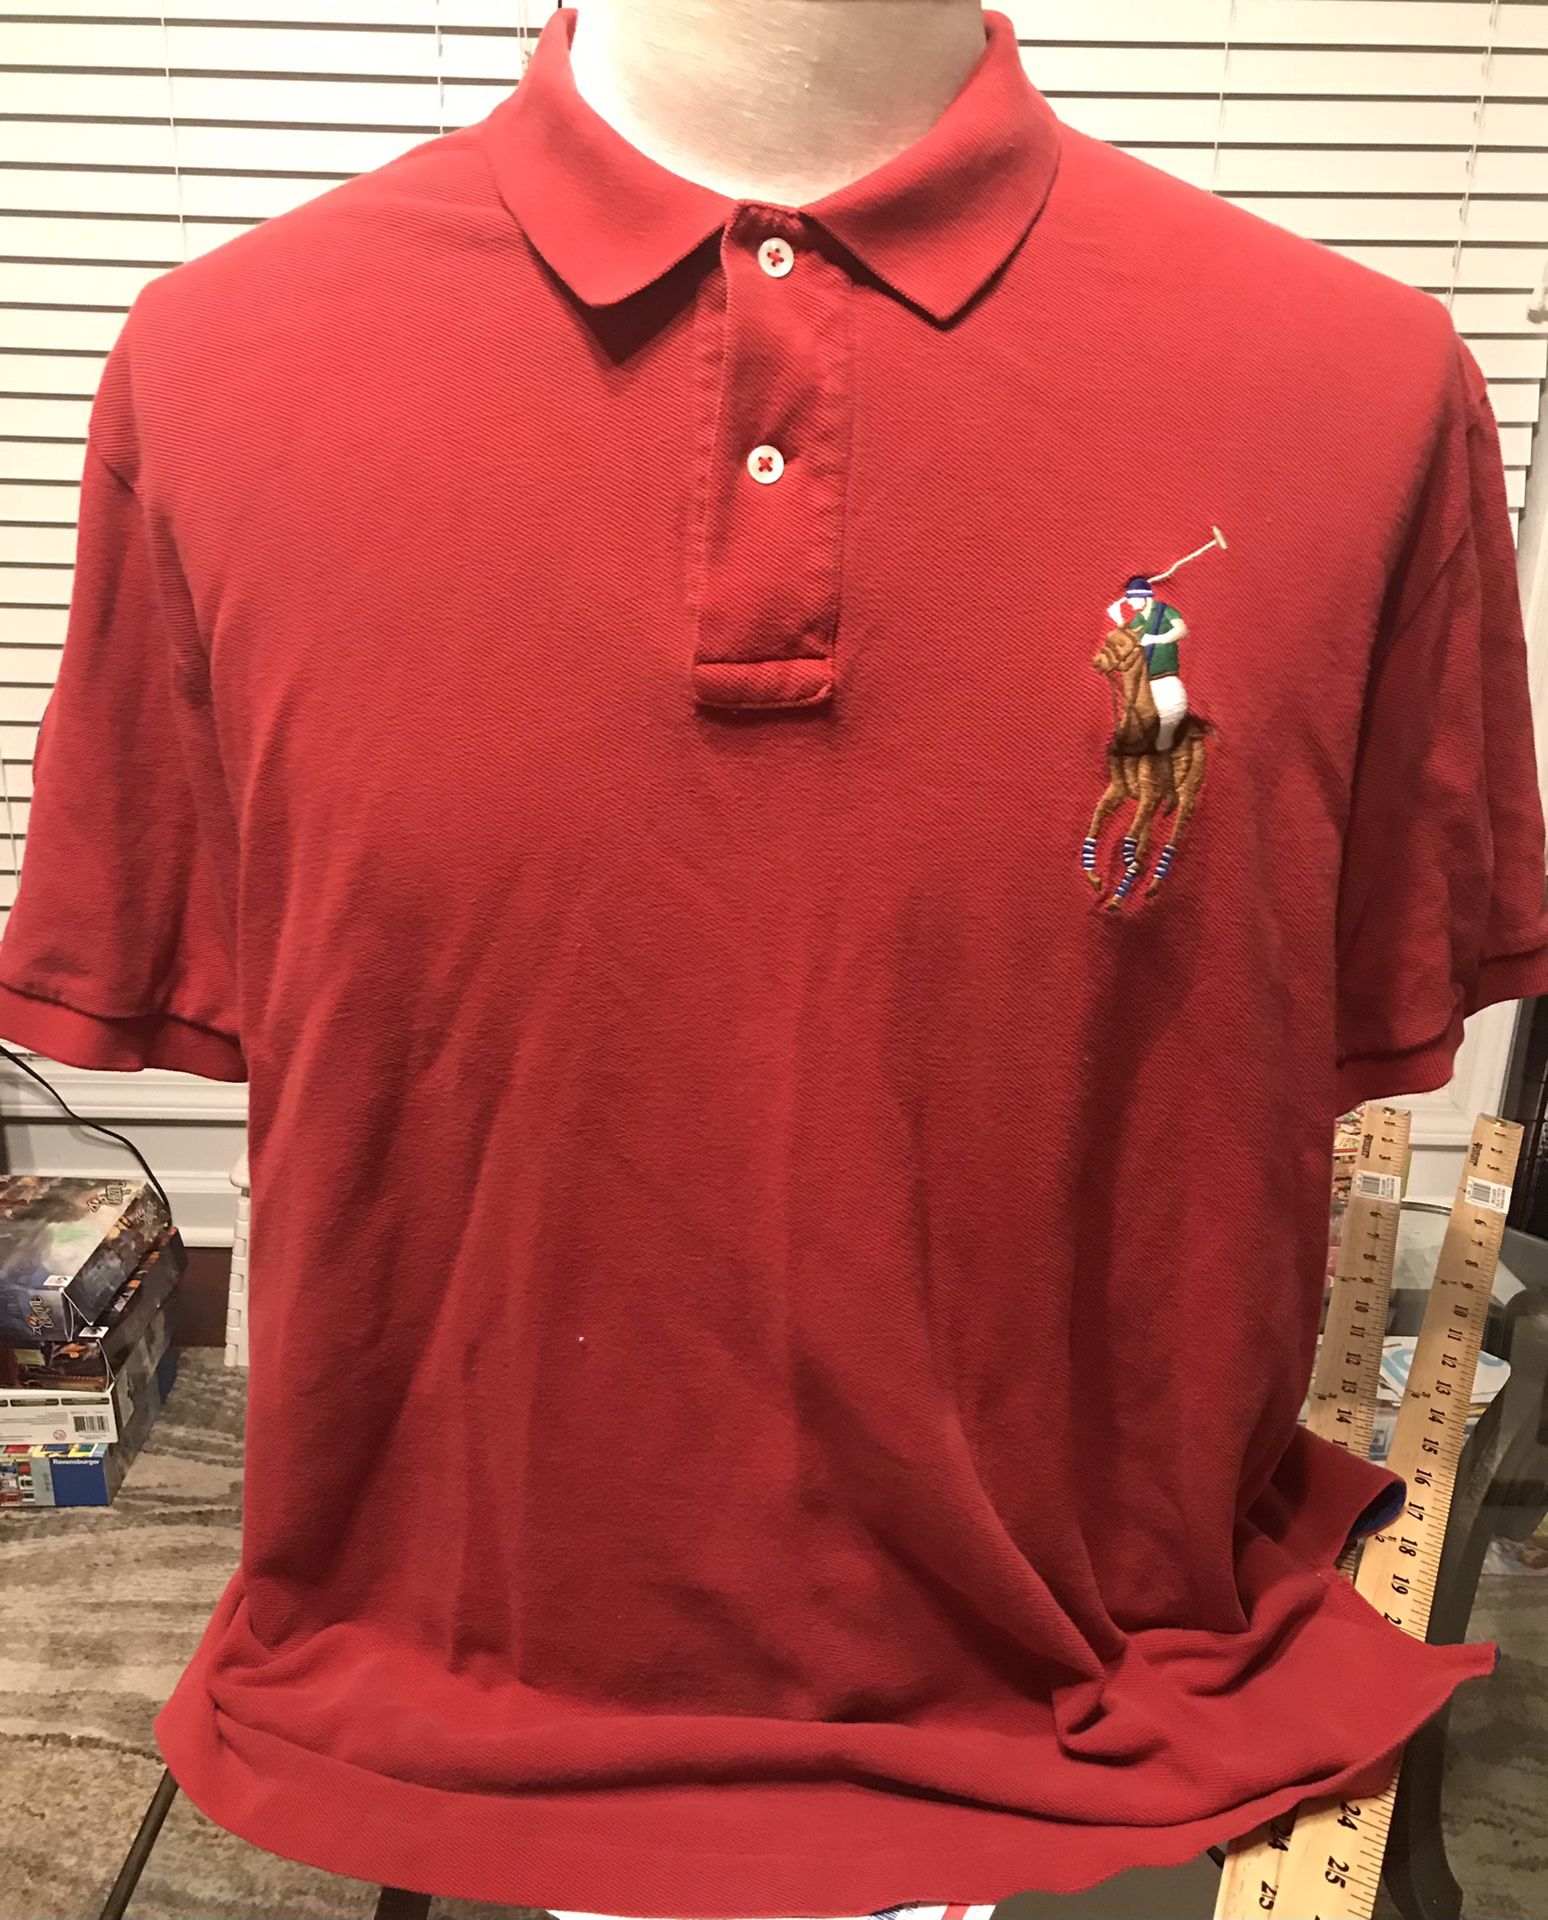 Polo Ralph Lauren Men's XL Short Sleeve Rugby Big Pony Polo Shirt Red #3